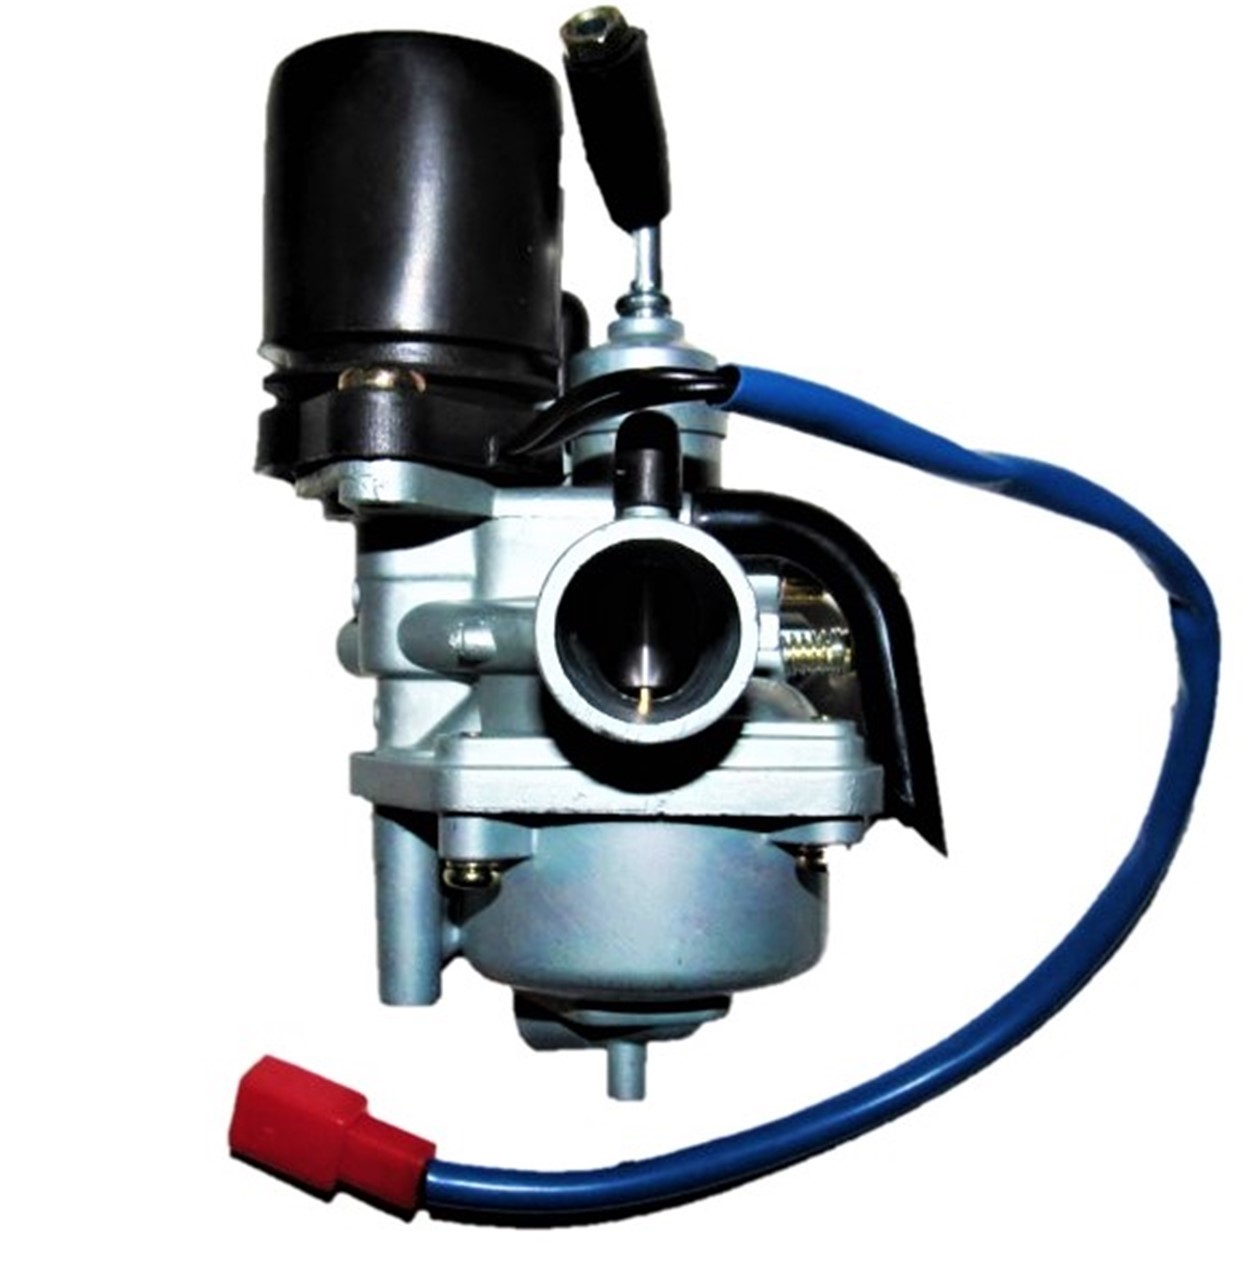 Mikuni Style 18mm 2 Stroke Carburetor with Electric Choke Intake OD=24mm Air OD=38mm Made in China, this is a less expensive alternative for 50,70,90cc 2 Stroke ATVs & Scooters.